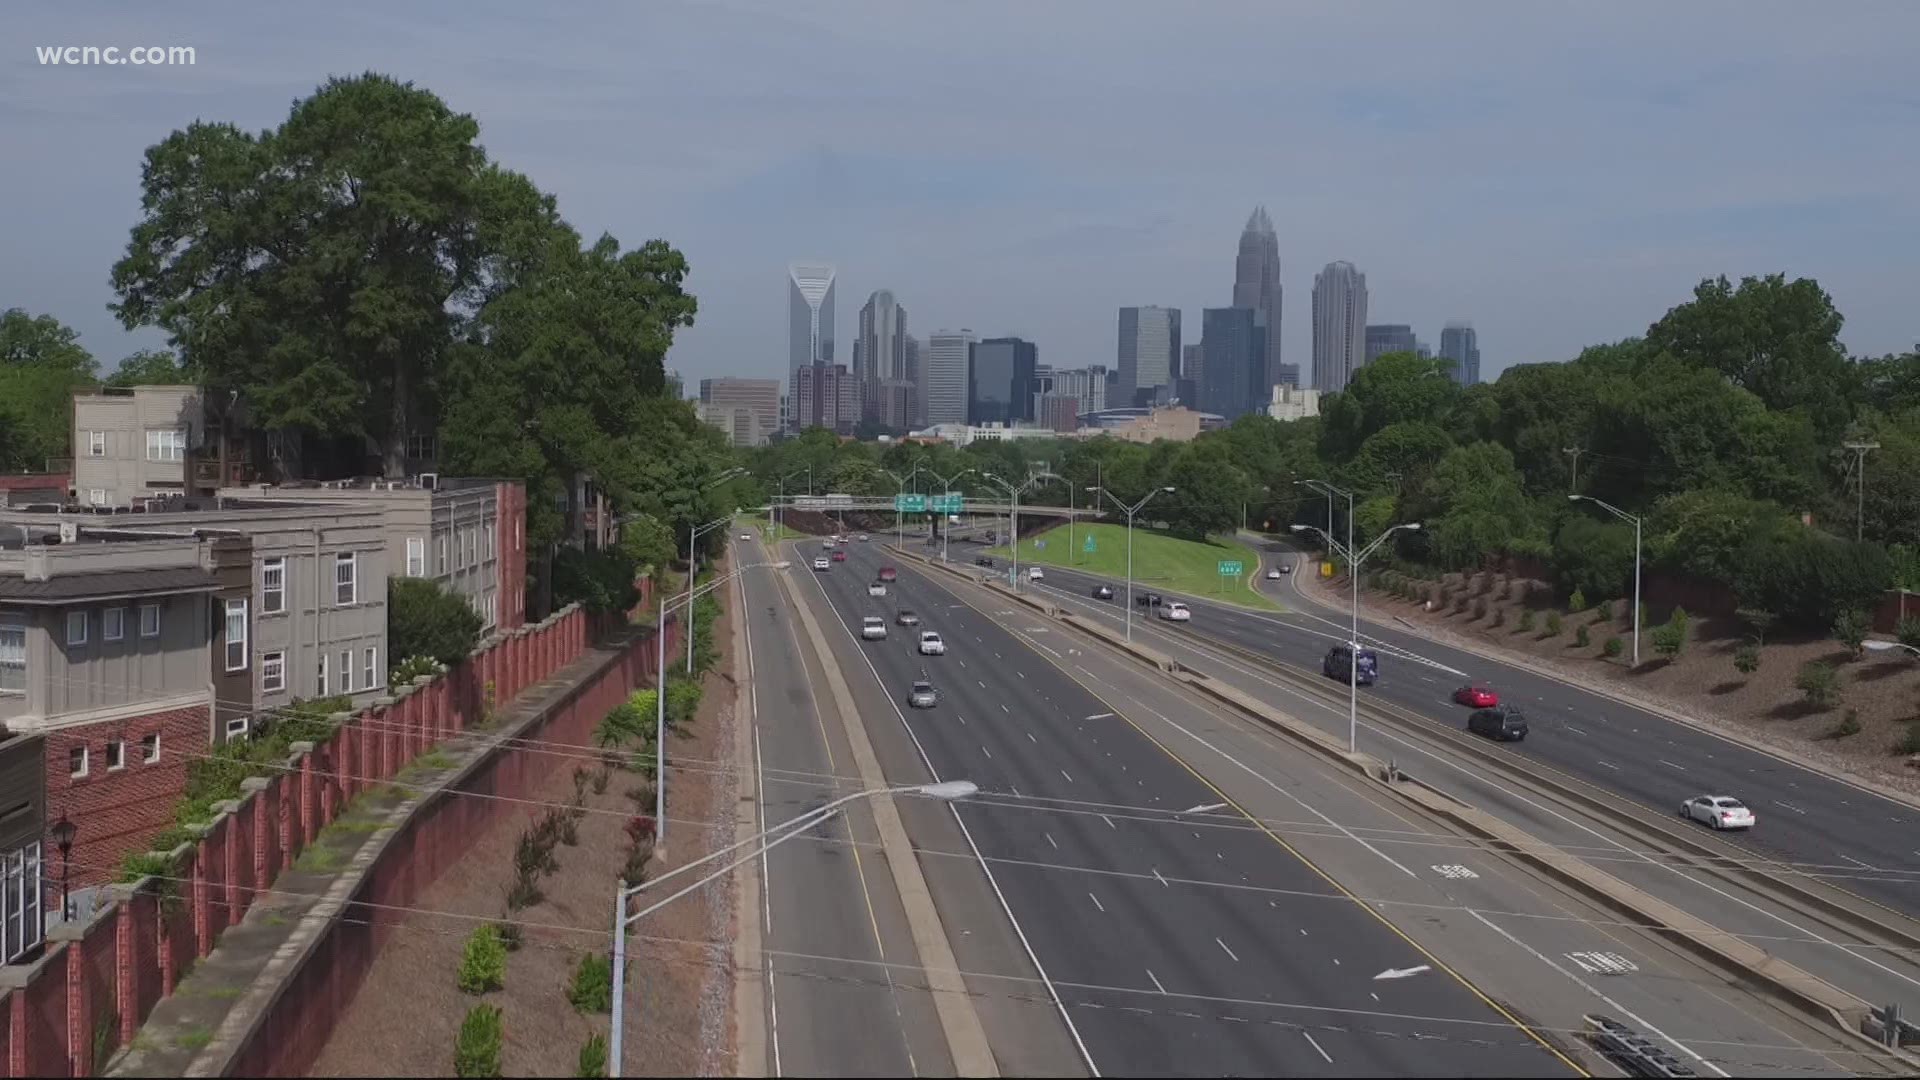 Are the roads in Charlotte disorganized? How do we compare to other cities?